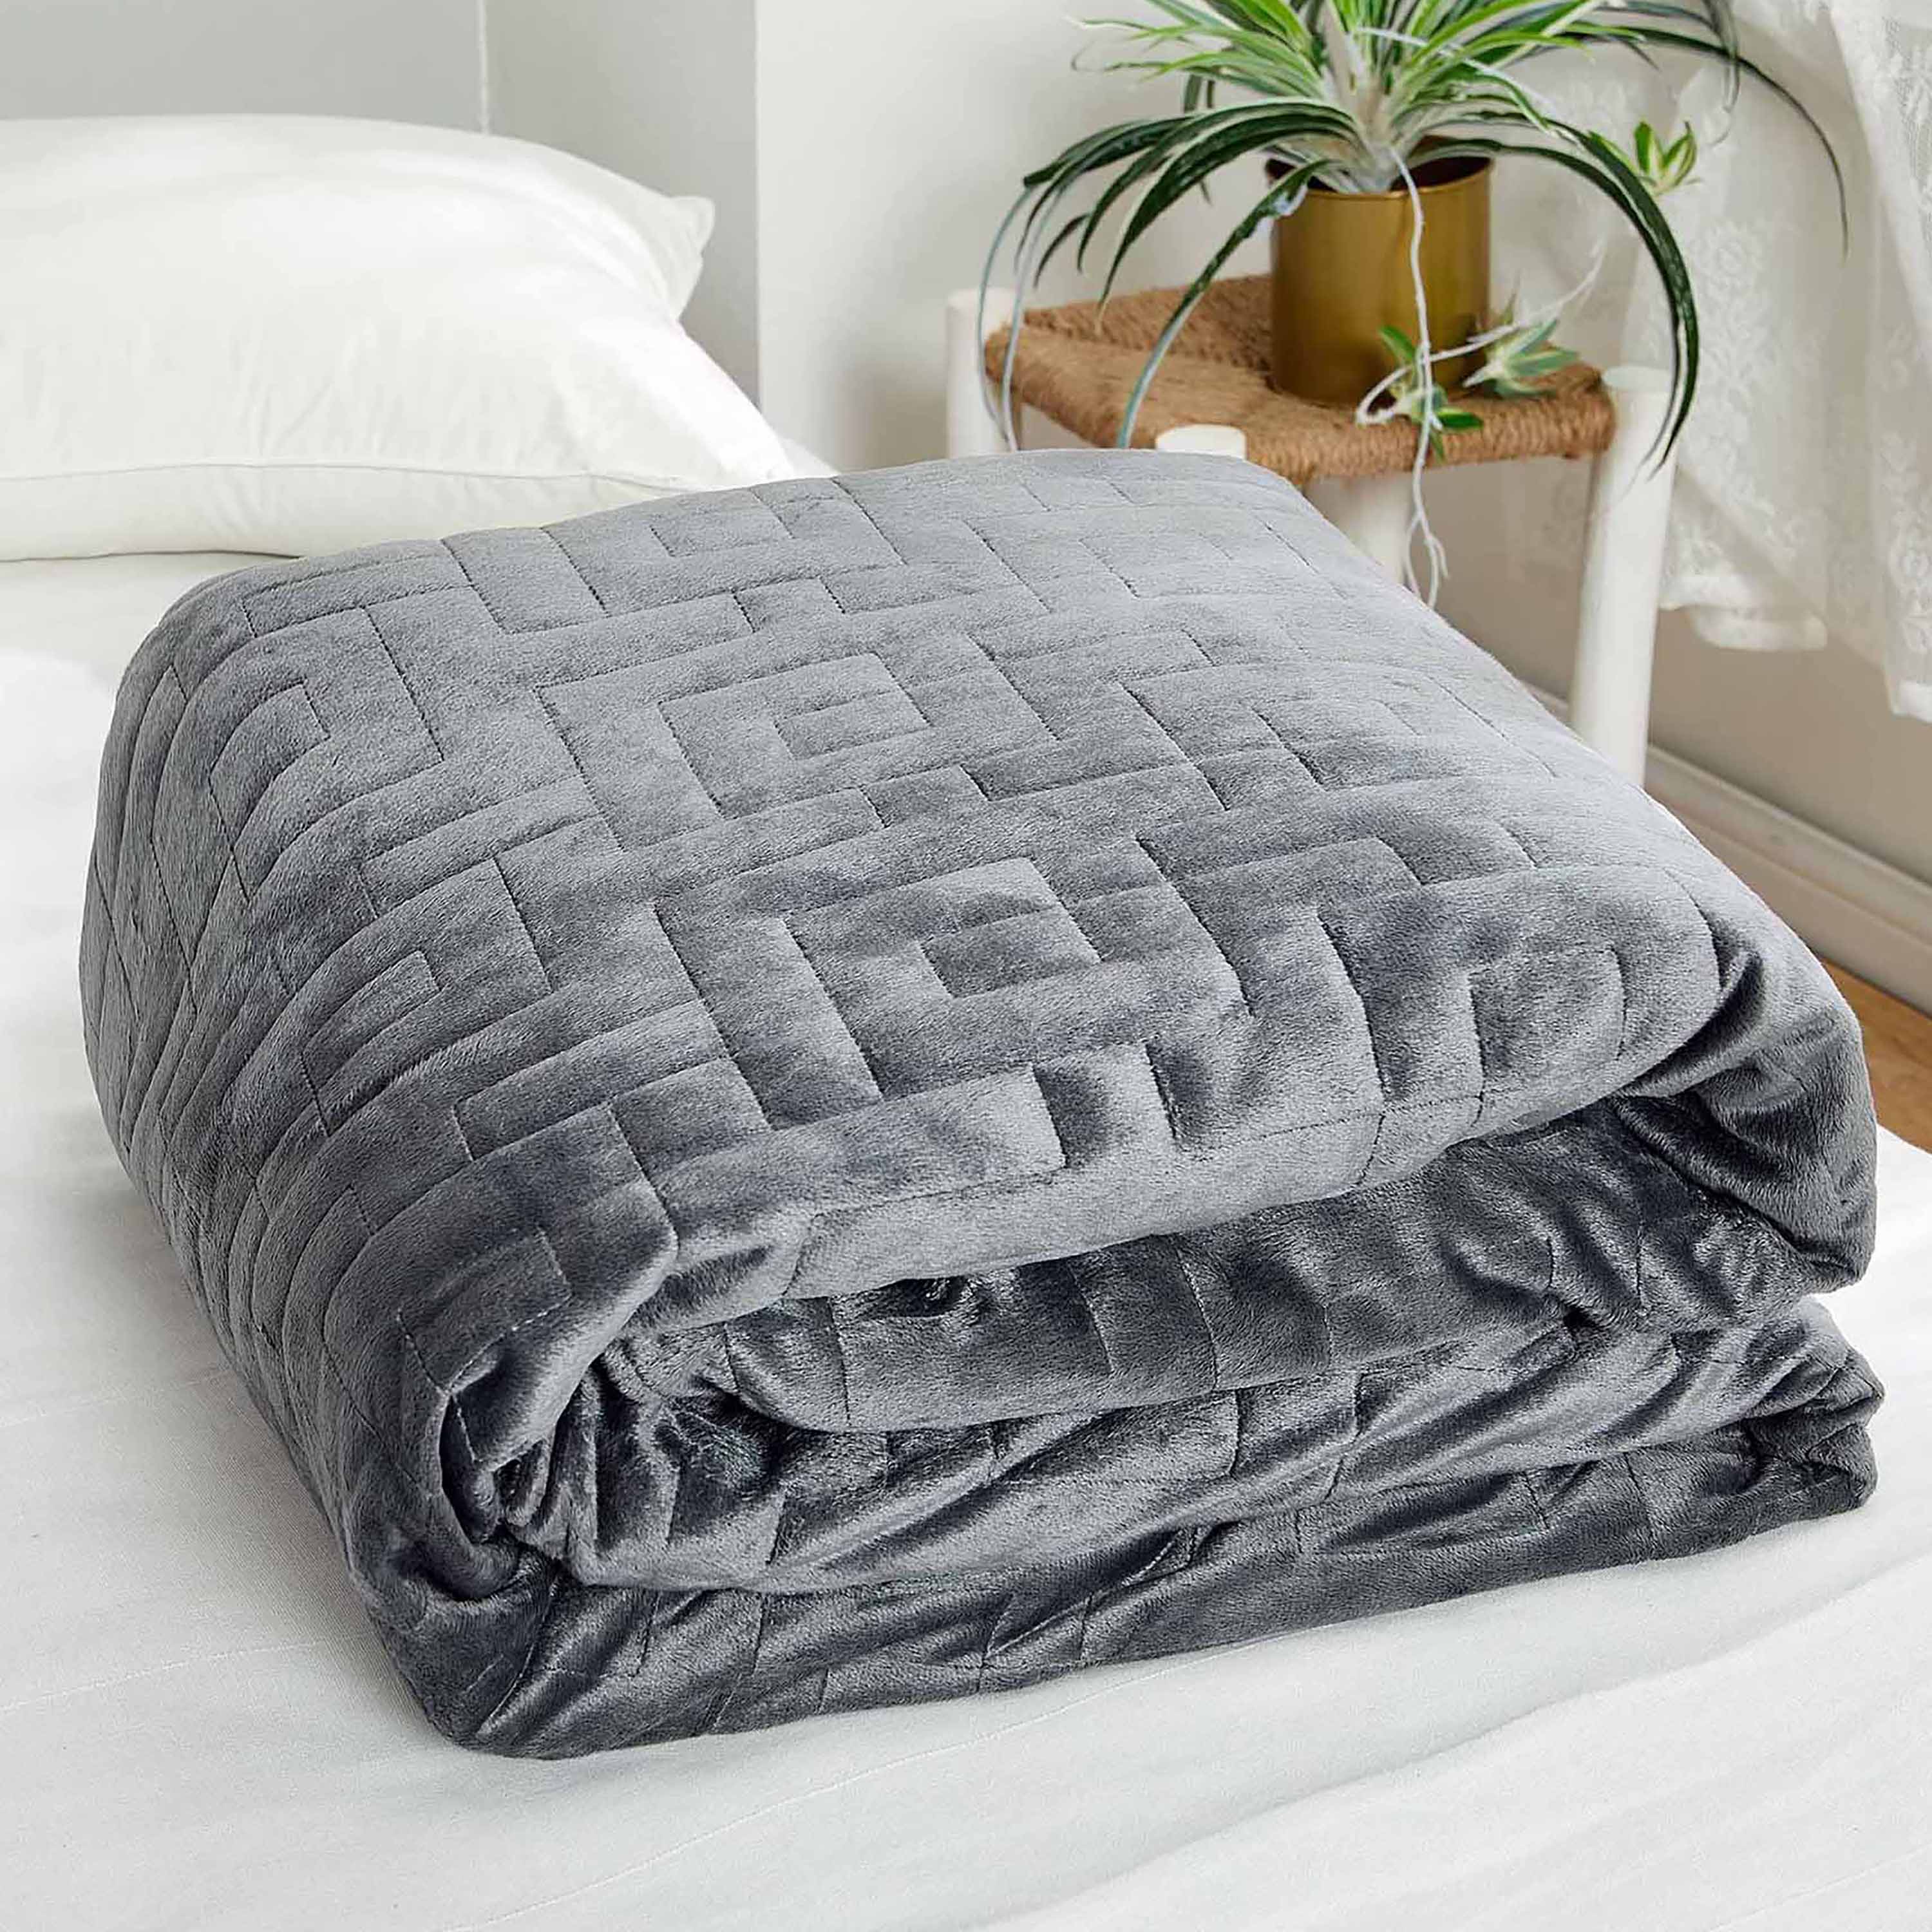 Duvet Removeable Washable Weighted Blanket 15 & 20 lb